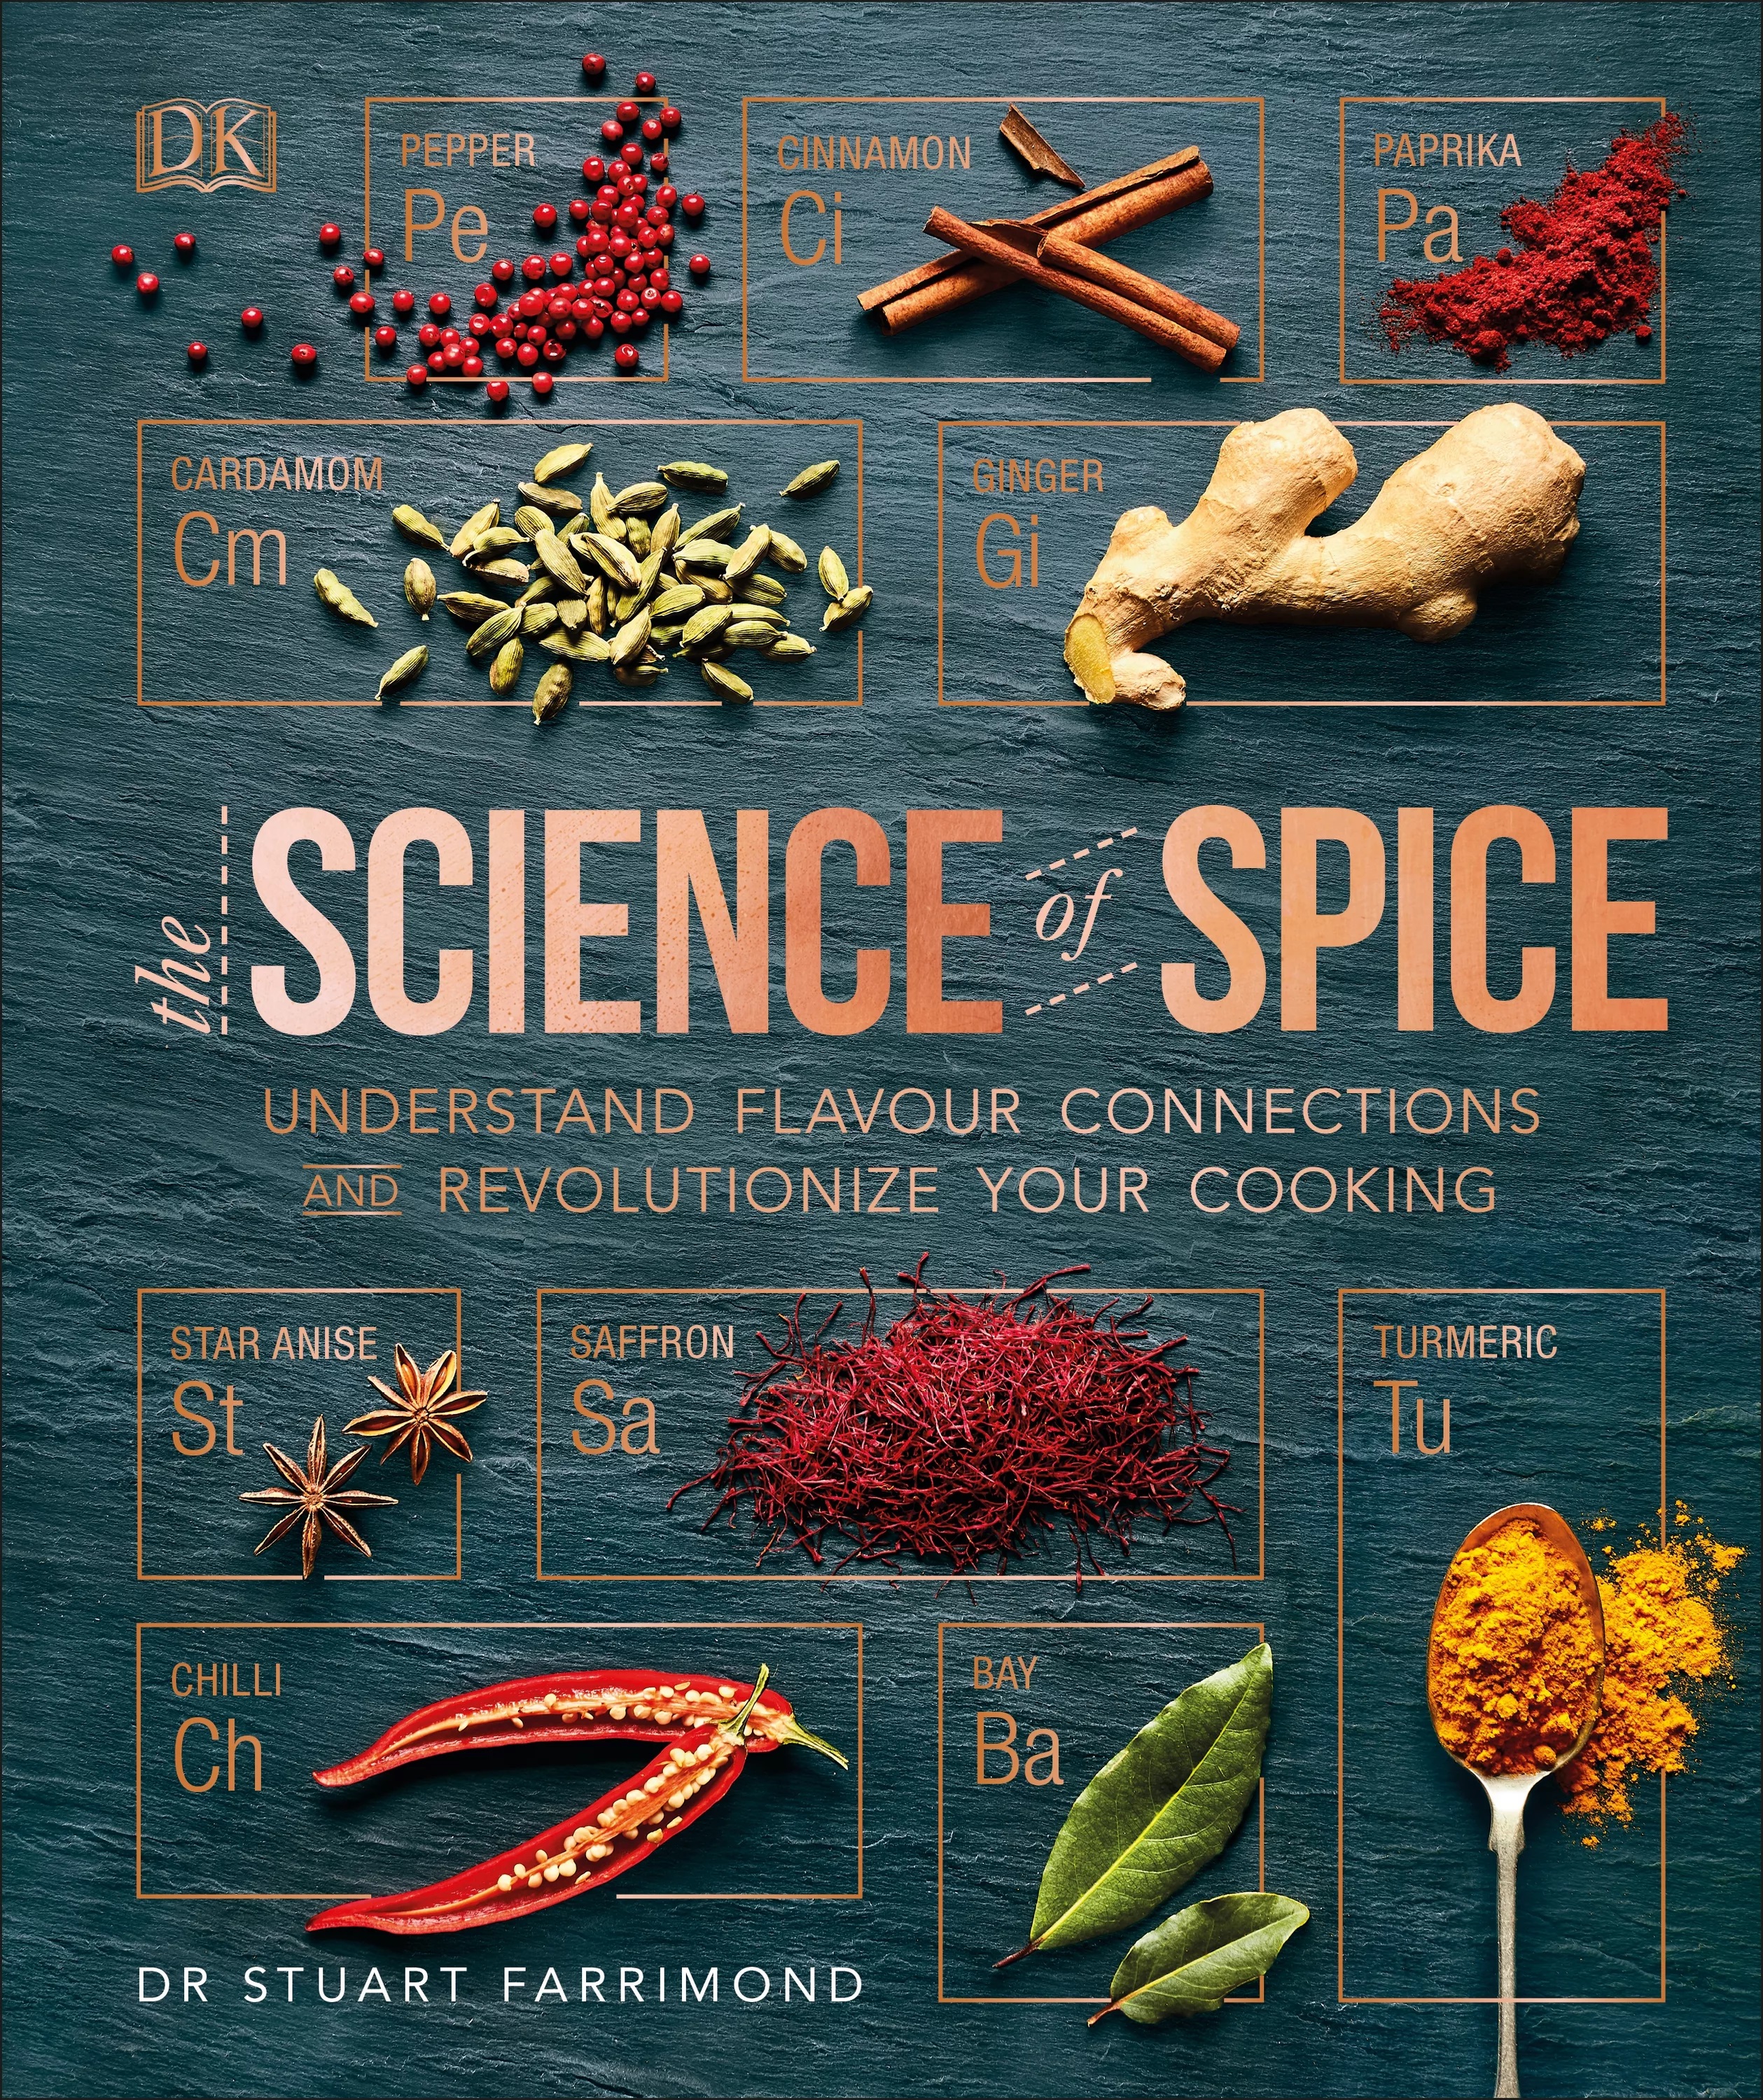  - The Science of Spice. Understand Flavour Connections and Revolutionize your Cooking